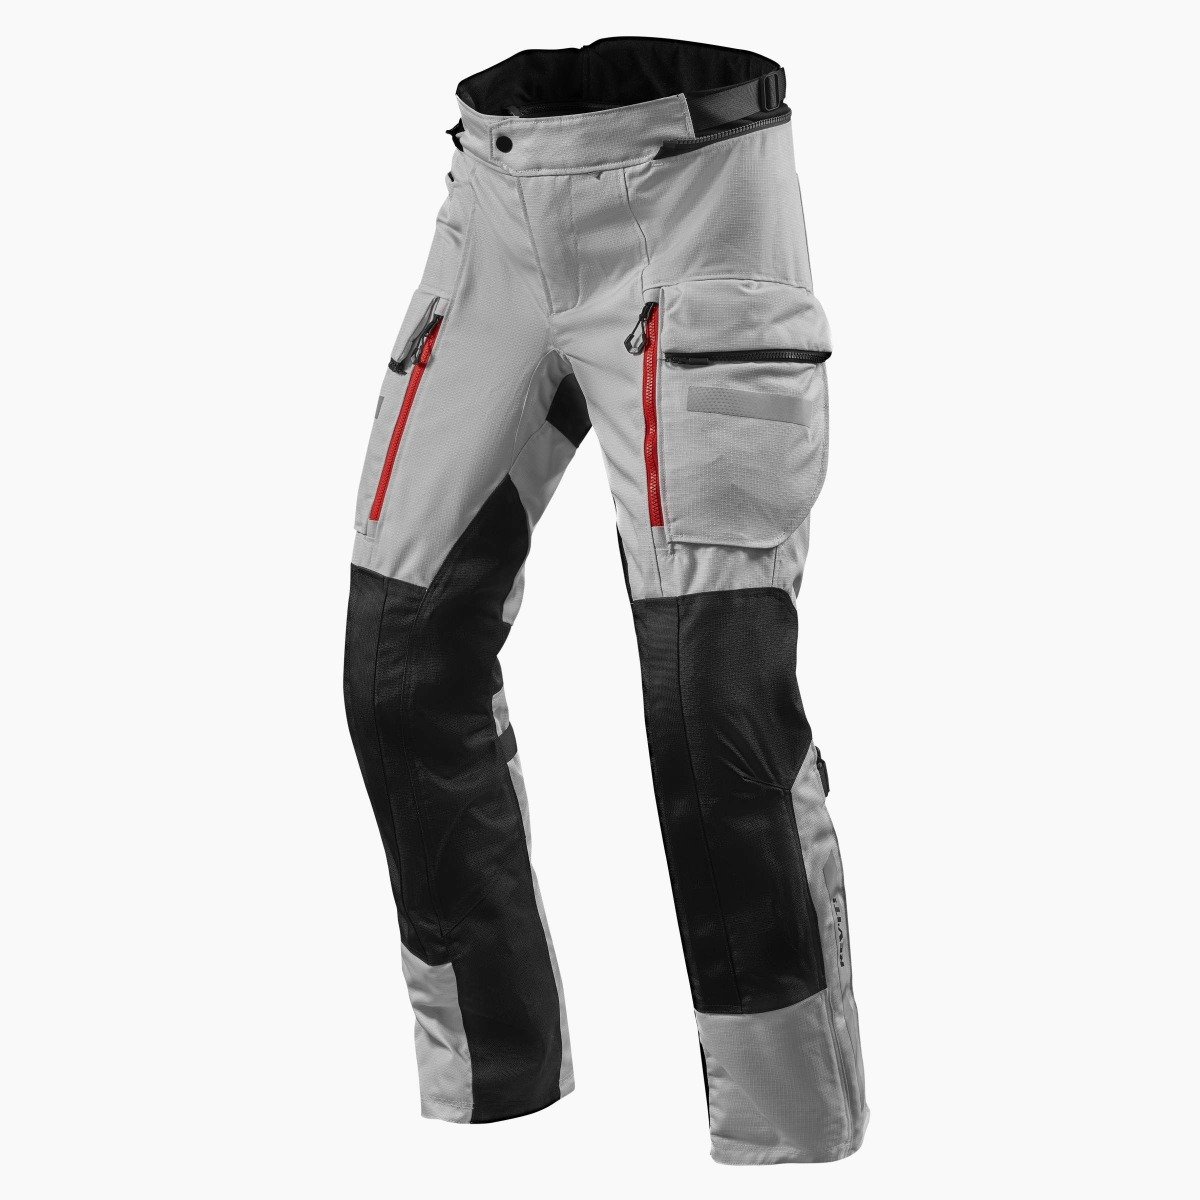 Image of REV'IT! Sand 4 H2O Standard Silver Black Motorcycle Pants Size 3XL ID 8700001316460